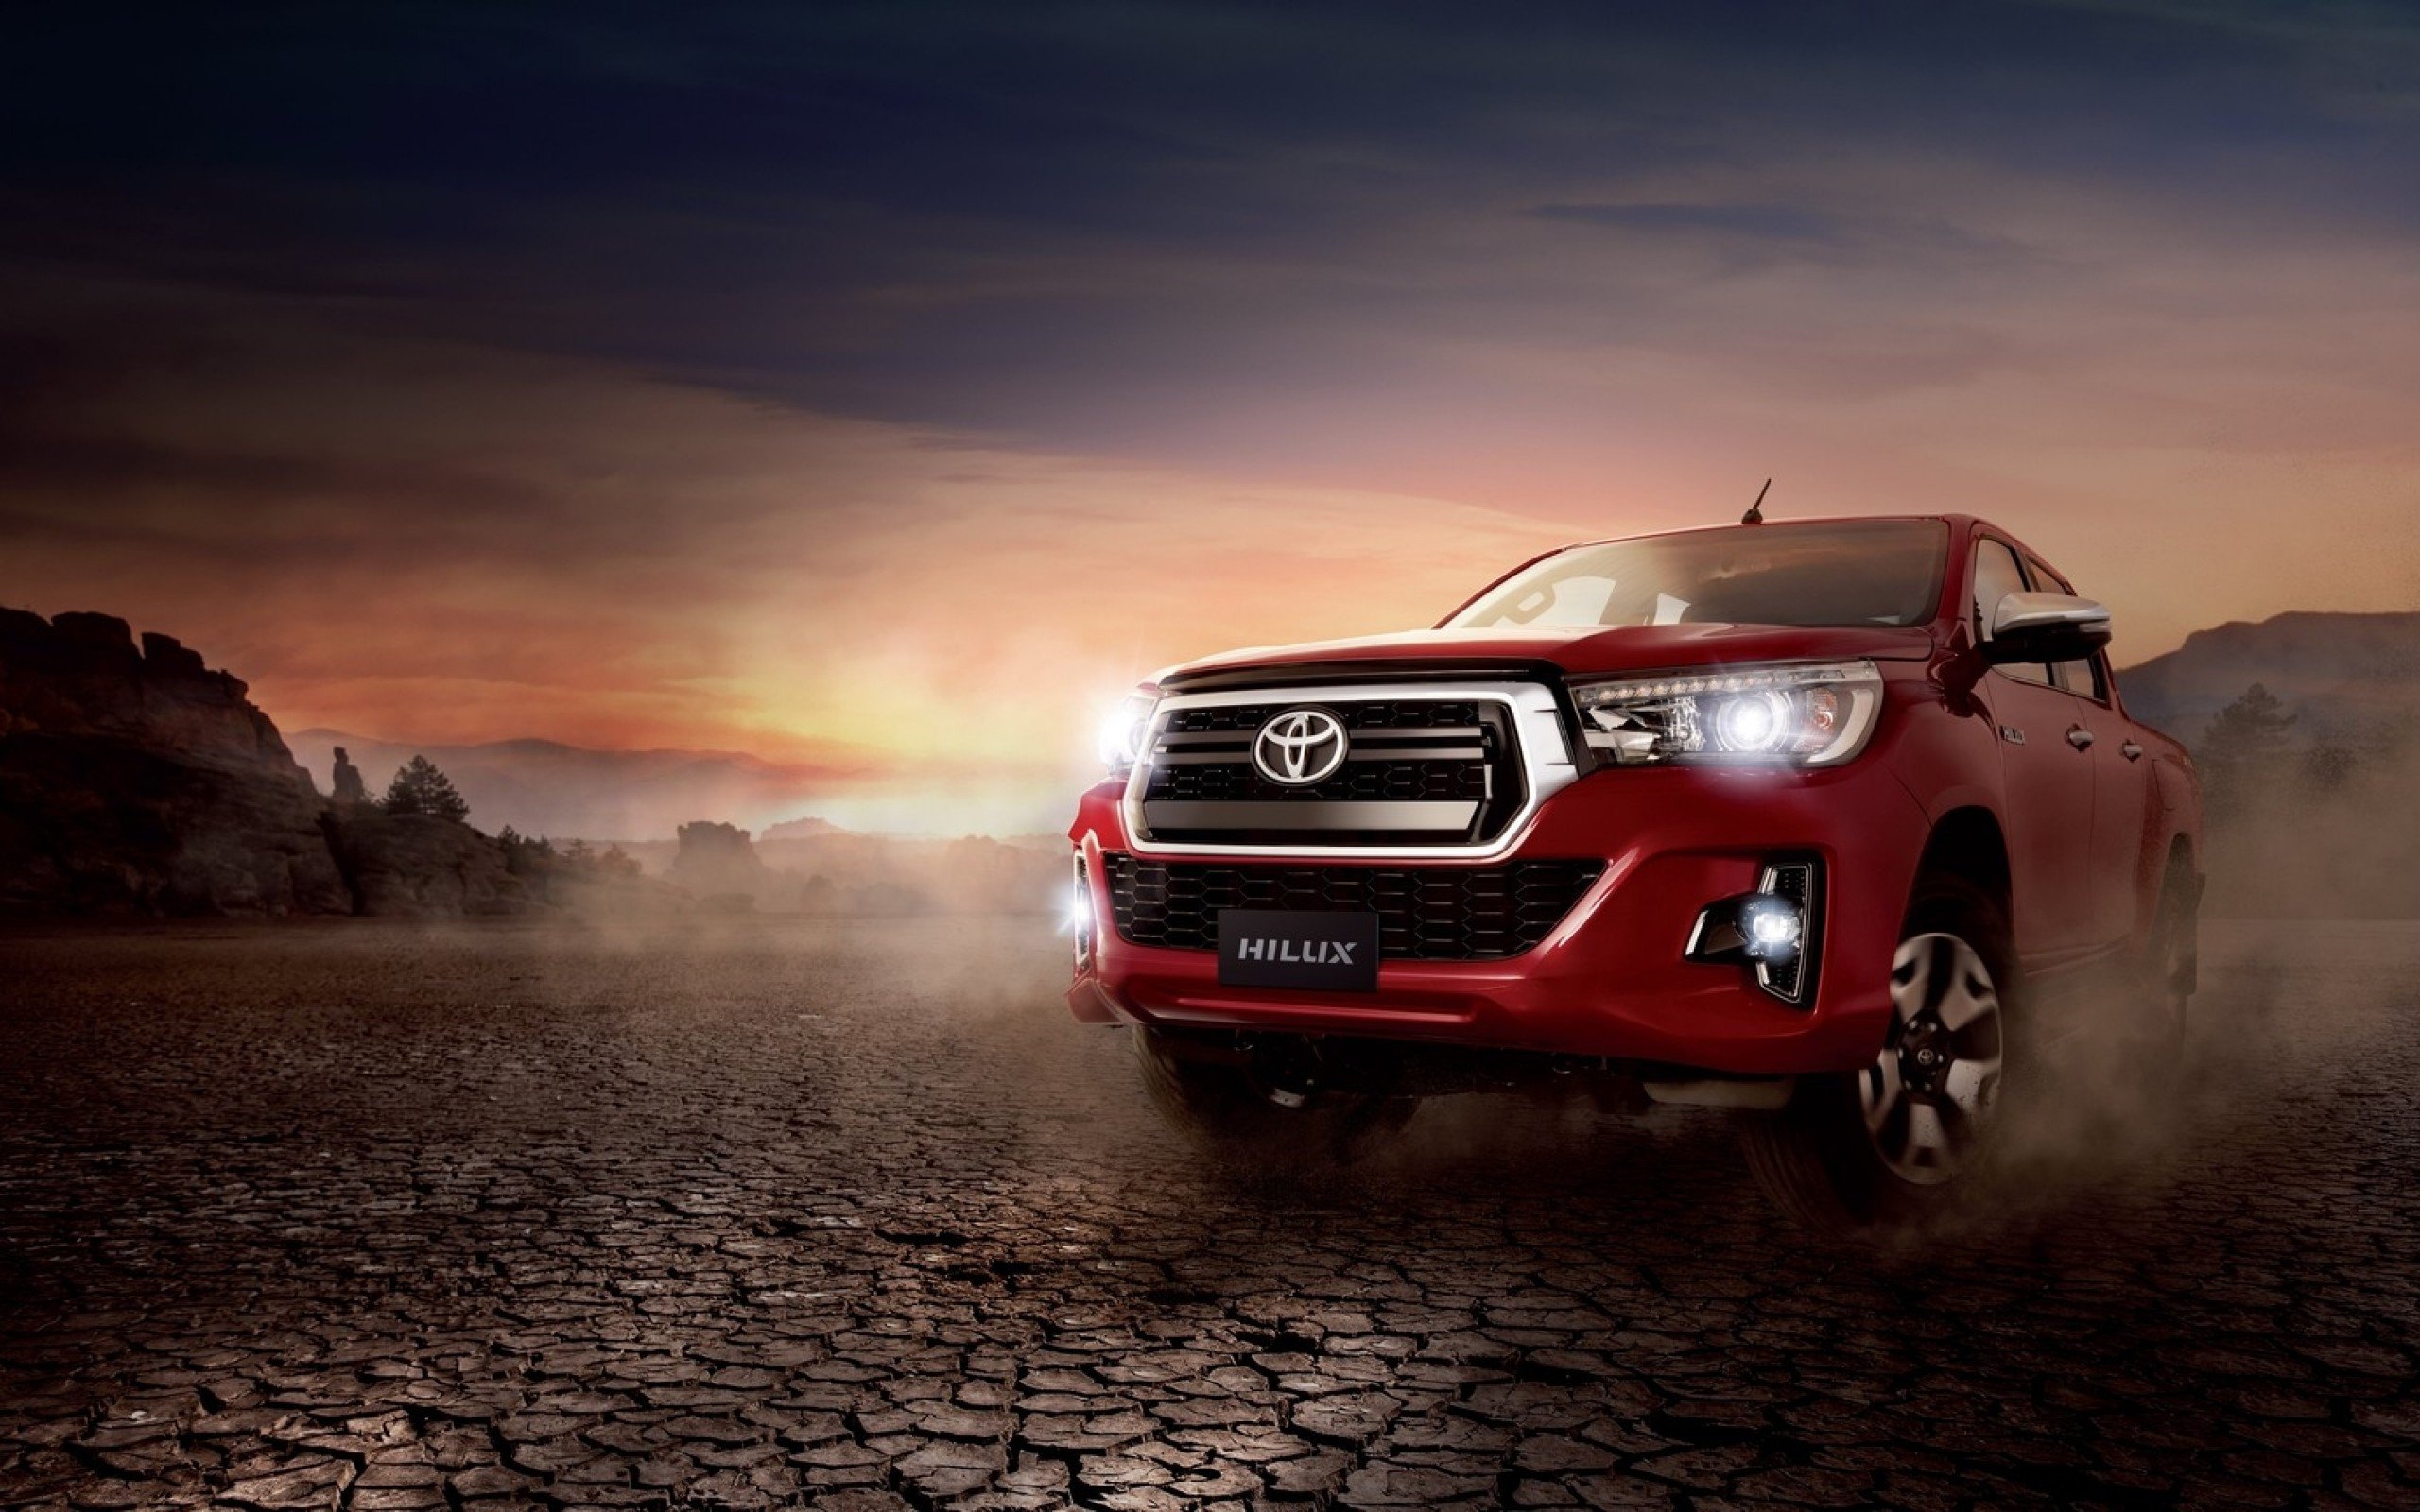 Download 2560x1600 Toyota Hilux Pickup Cars, Red Wallpaper for MacBook Pro 13 inch